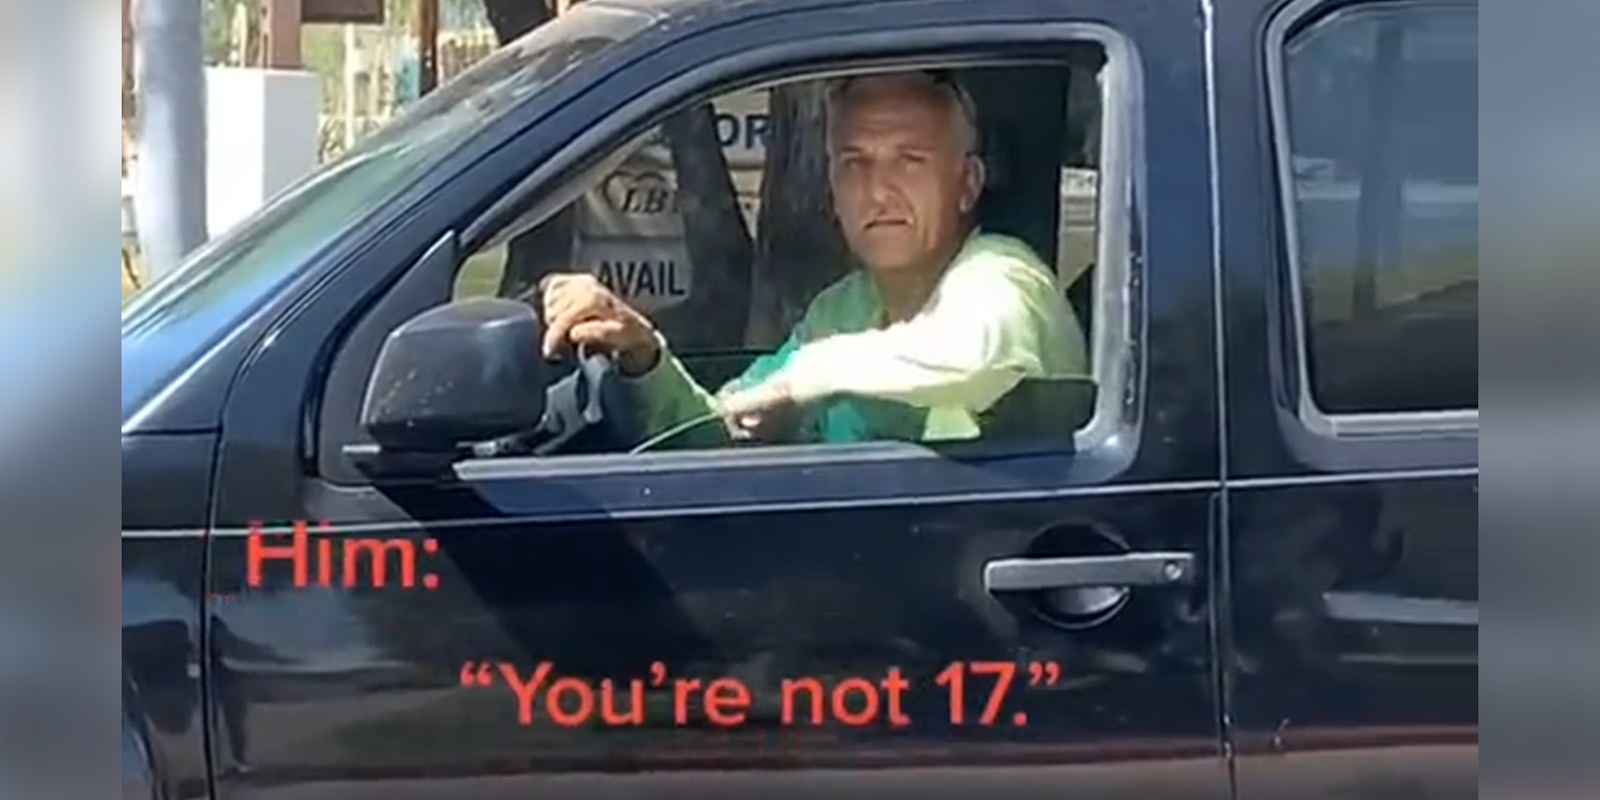 man in driver's seat looking out of window with caption 'Him: You're not 17.'